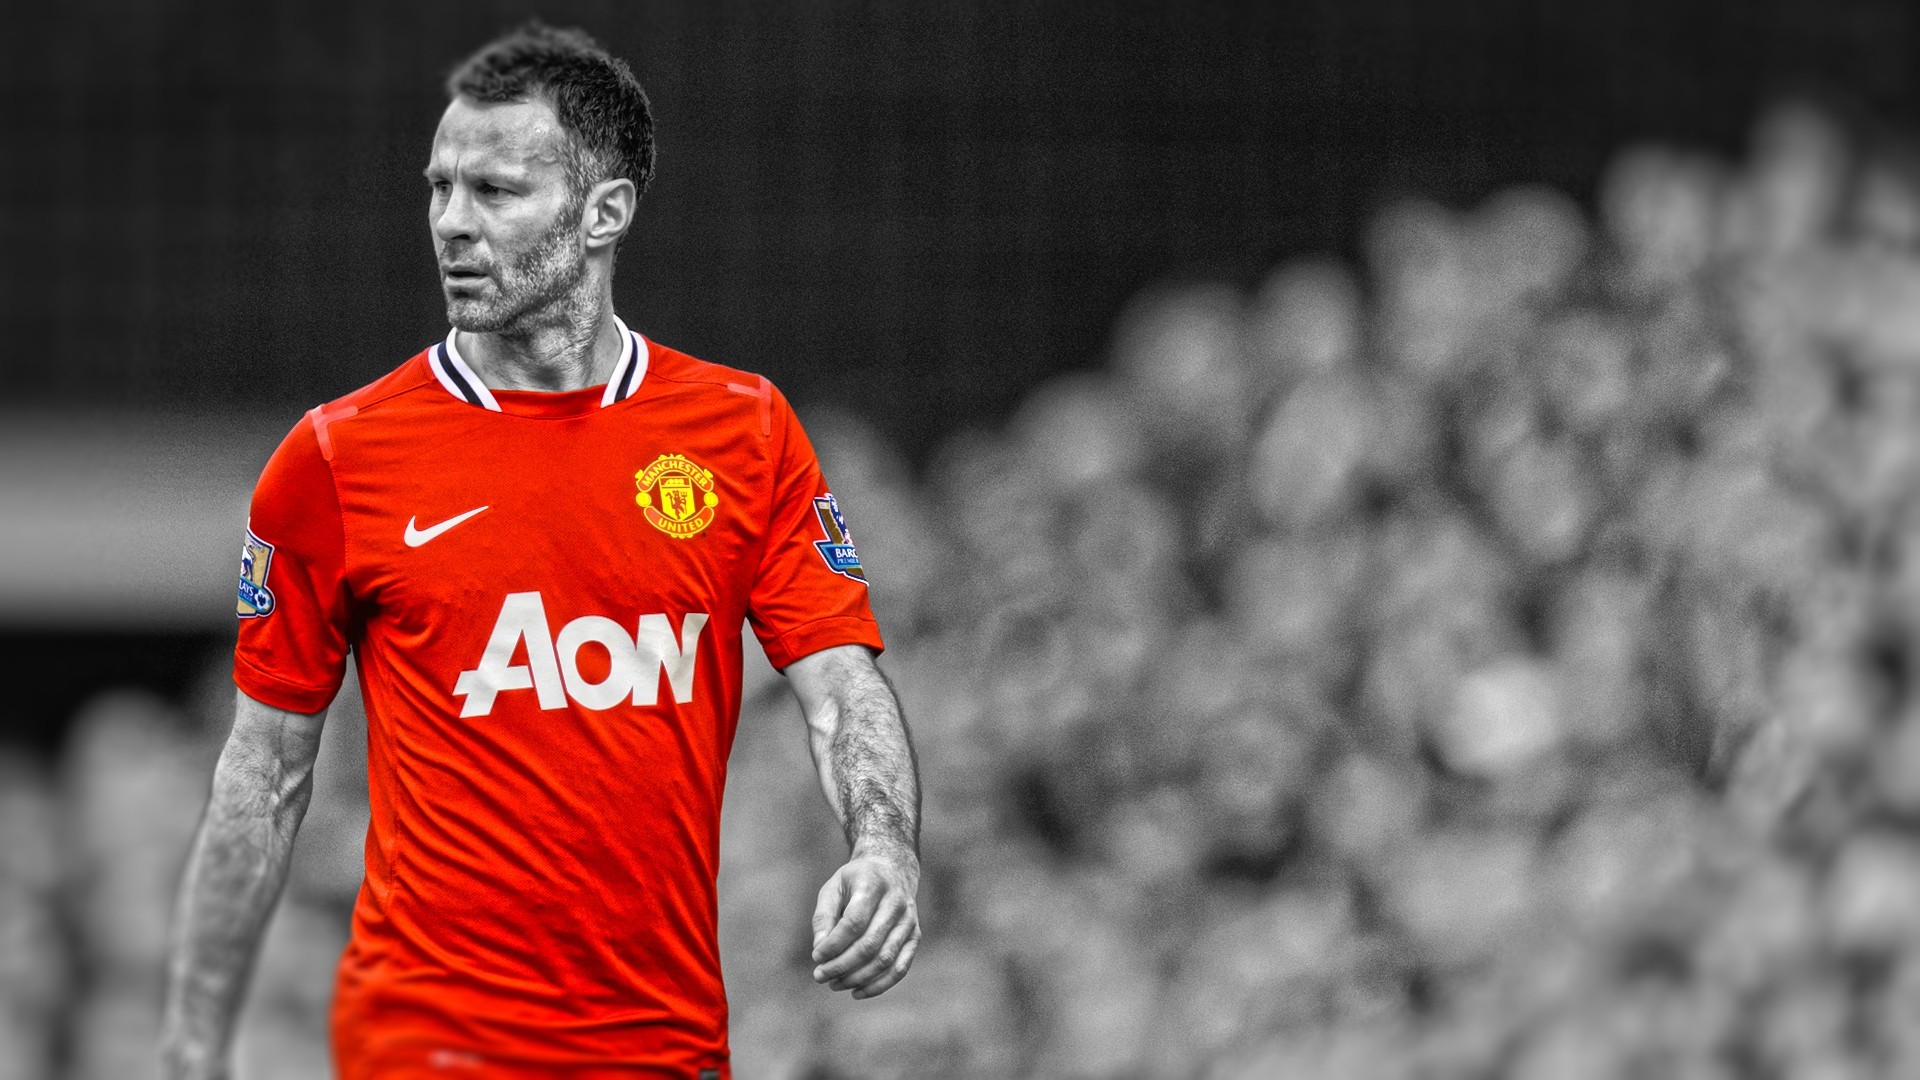 Ryan Giggs Manchester United Men Selective Coloring Soccer Sport 1920x1080